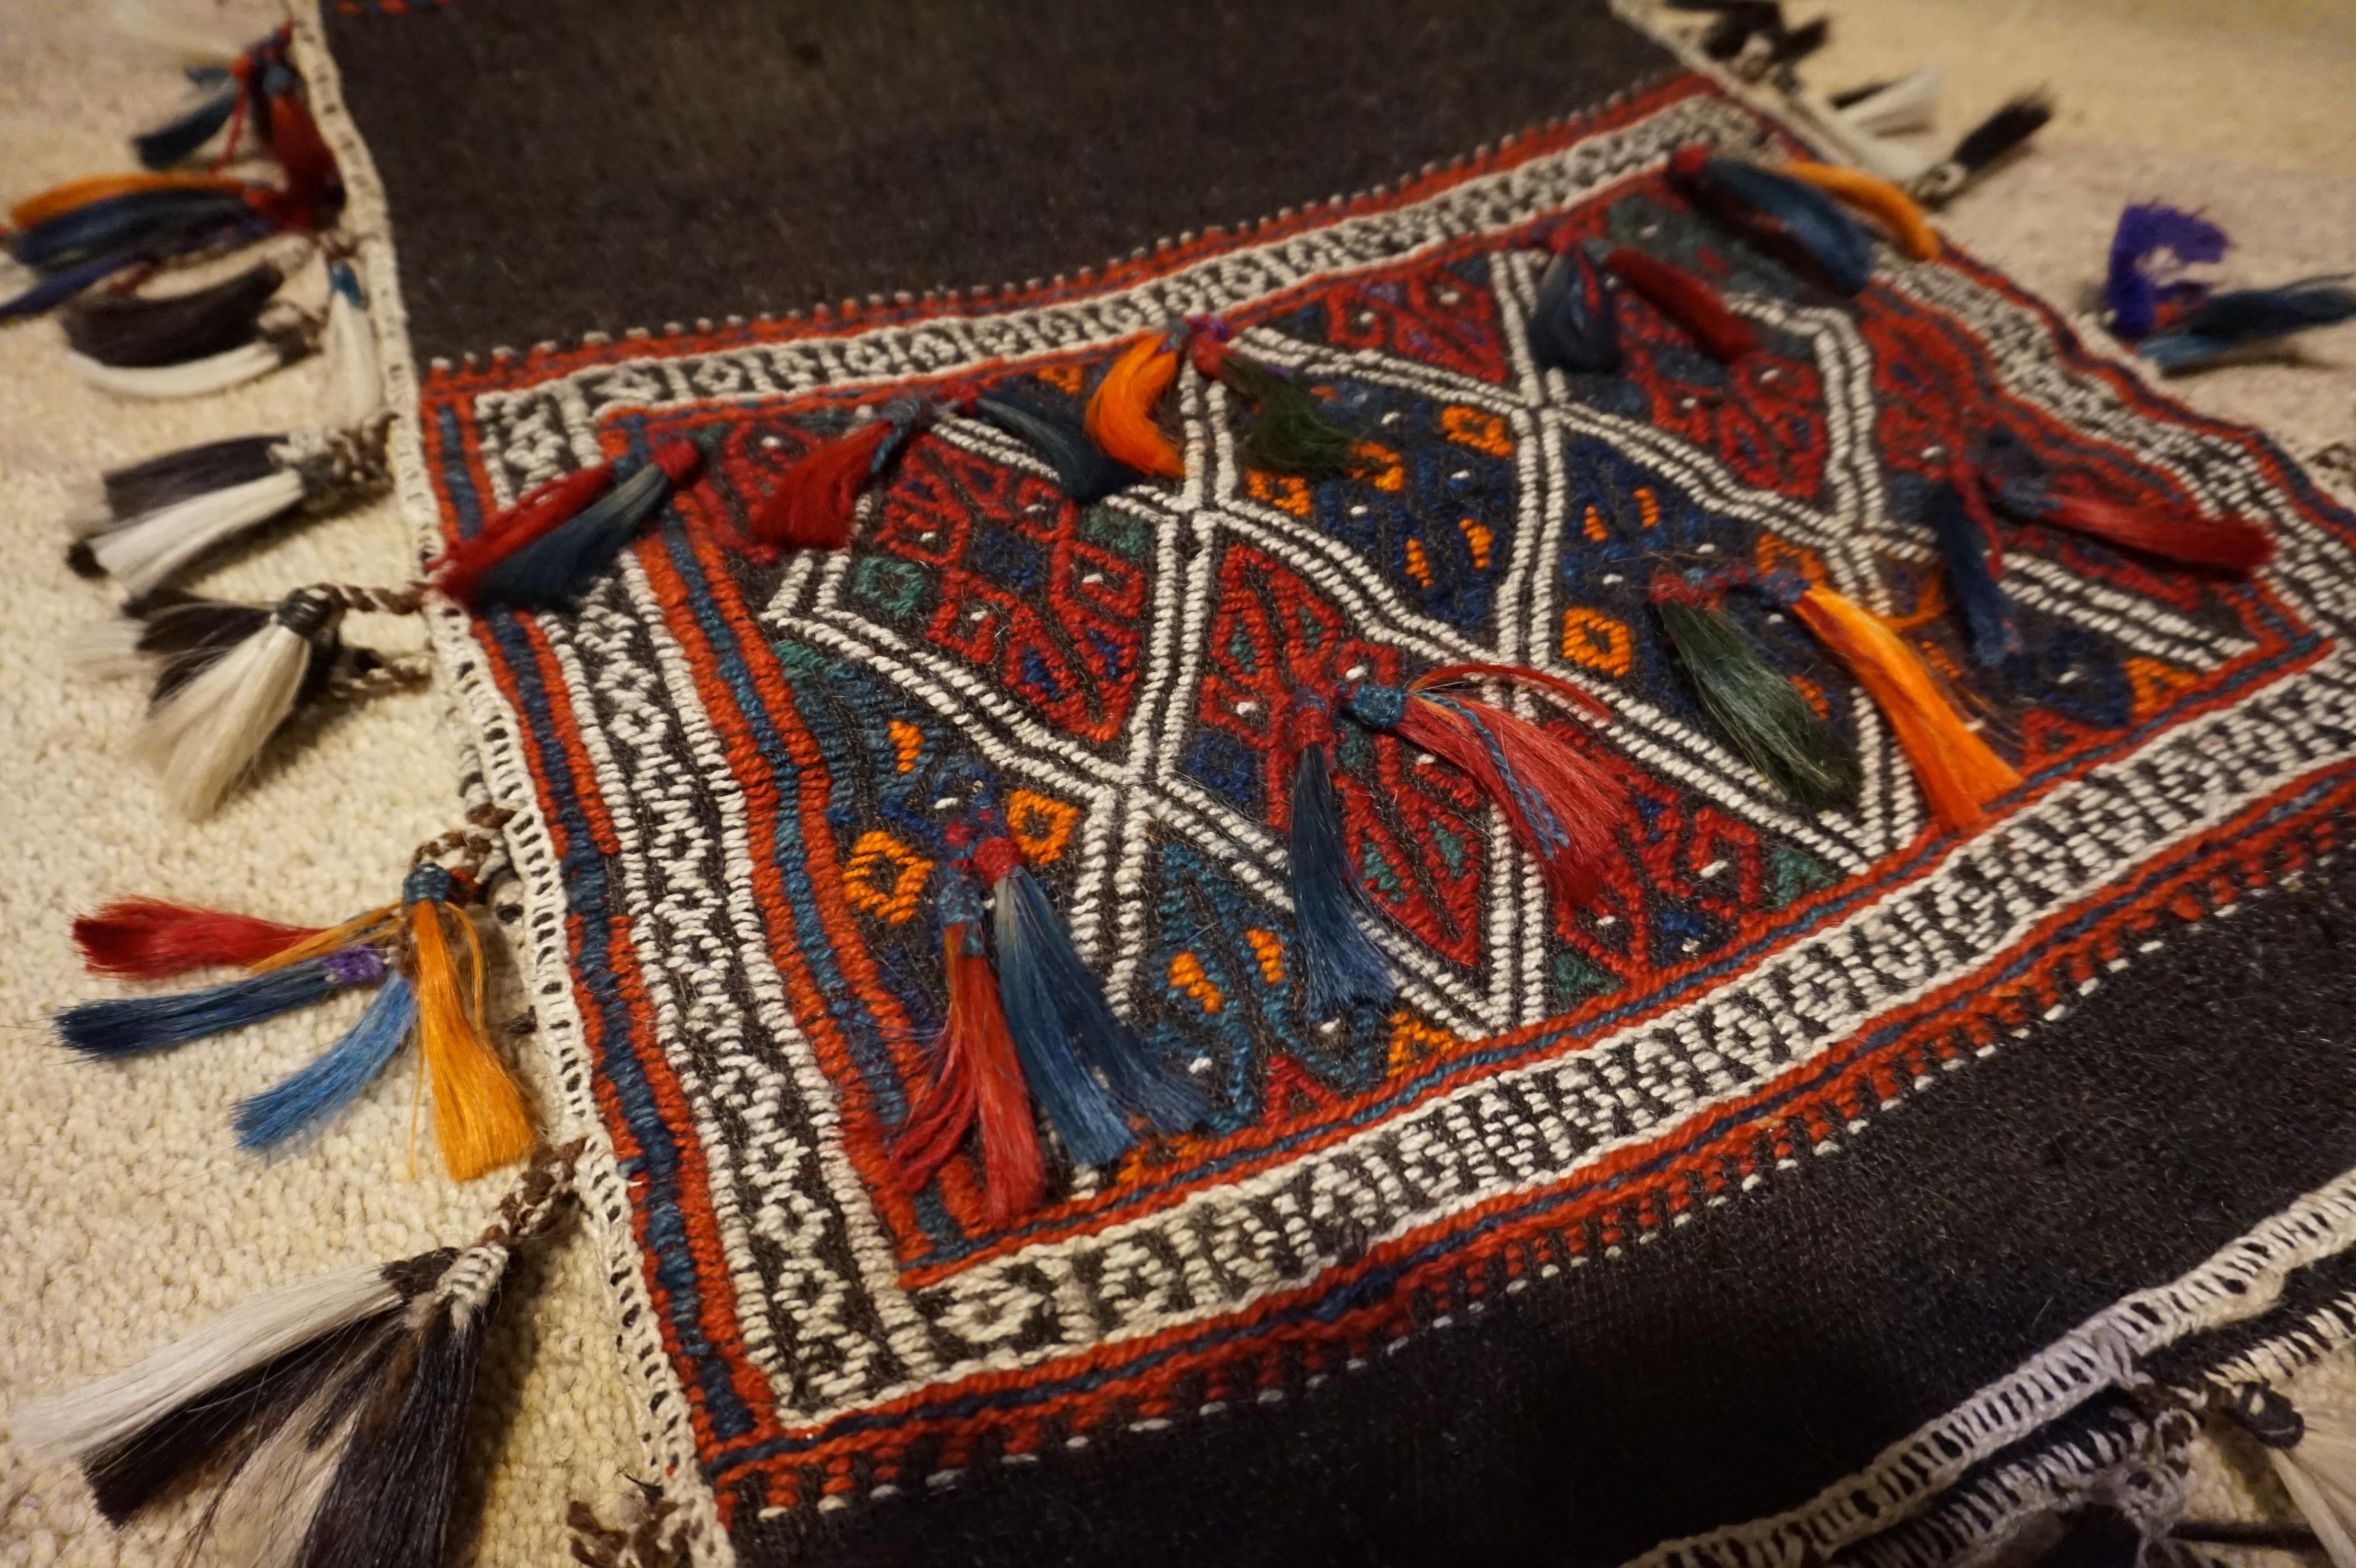 Fine example of older Turkish saddle bag with 1926 export seal. Lovely colorful kite shape pattern juxtaposed against a dark brown near black background. In good condition,

circa 1920s.